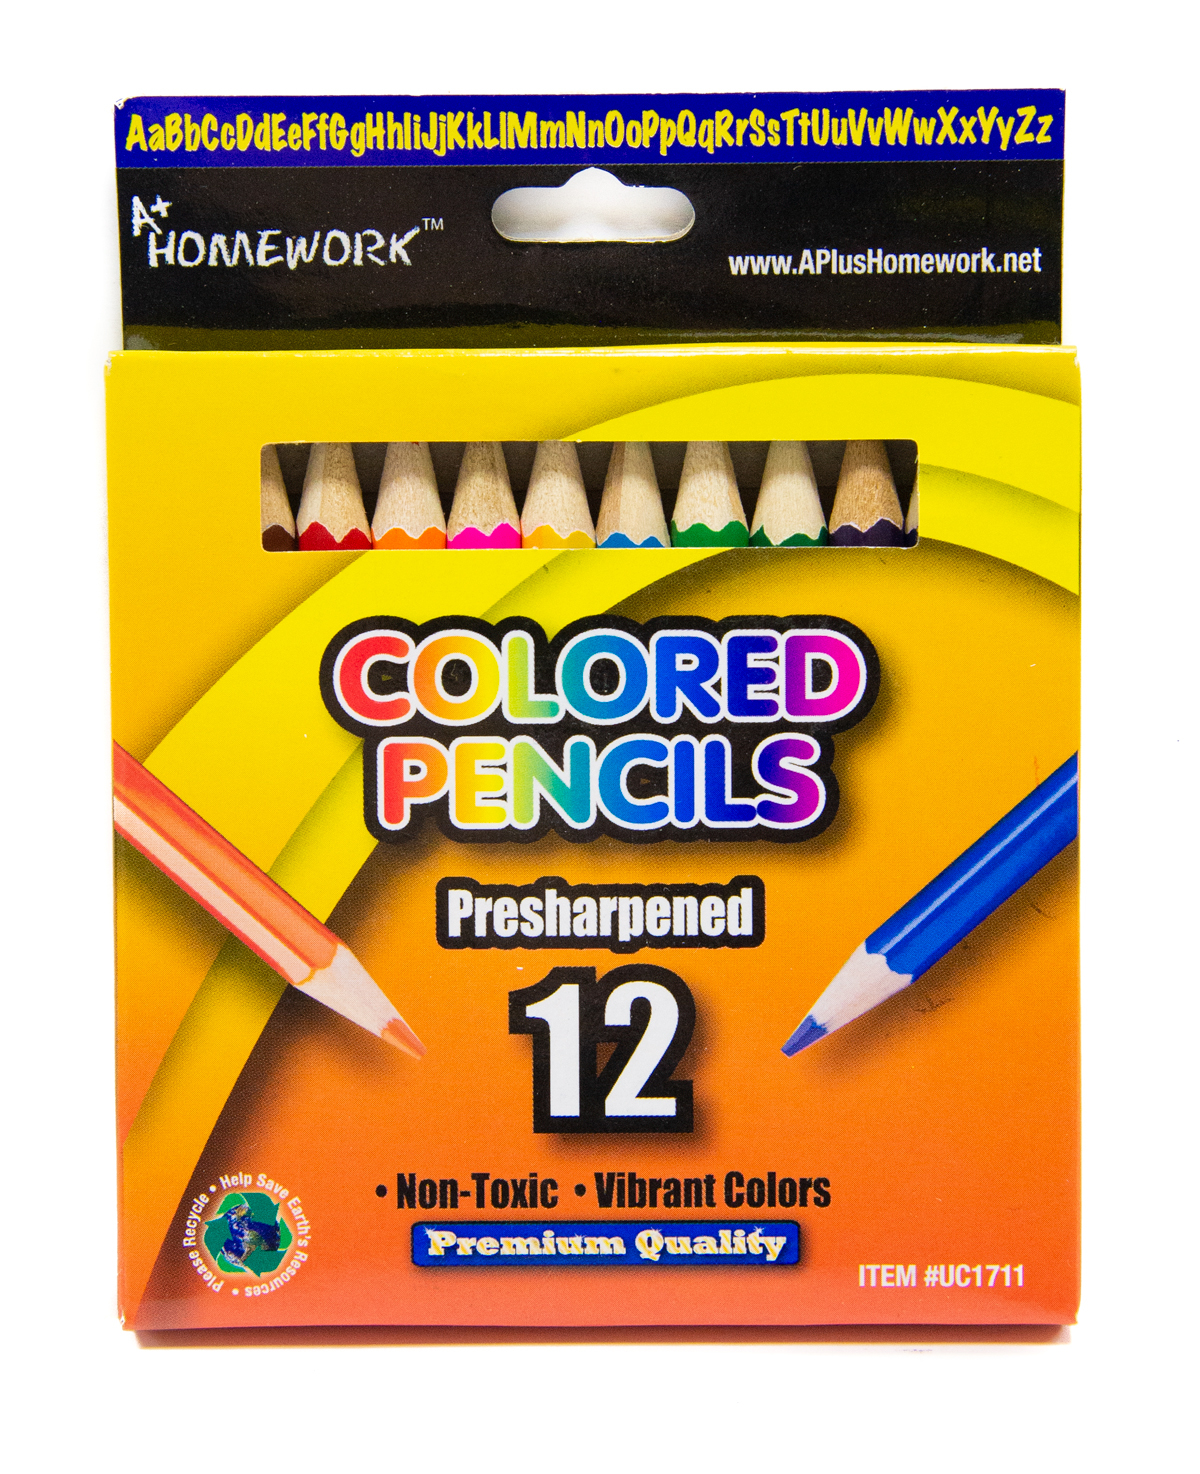 12/48 Count Long-lasting Colored Pencils Presharpened Color Pencil